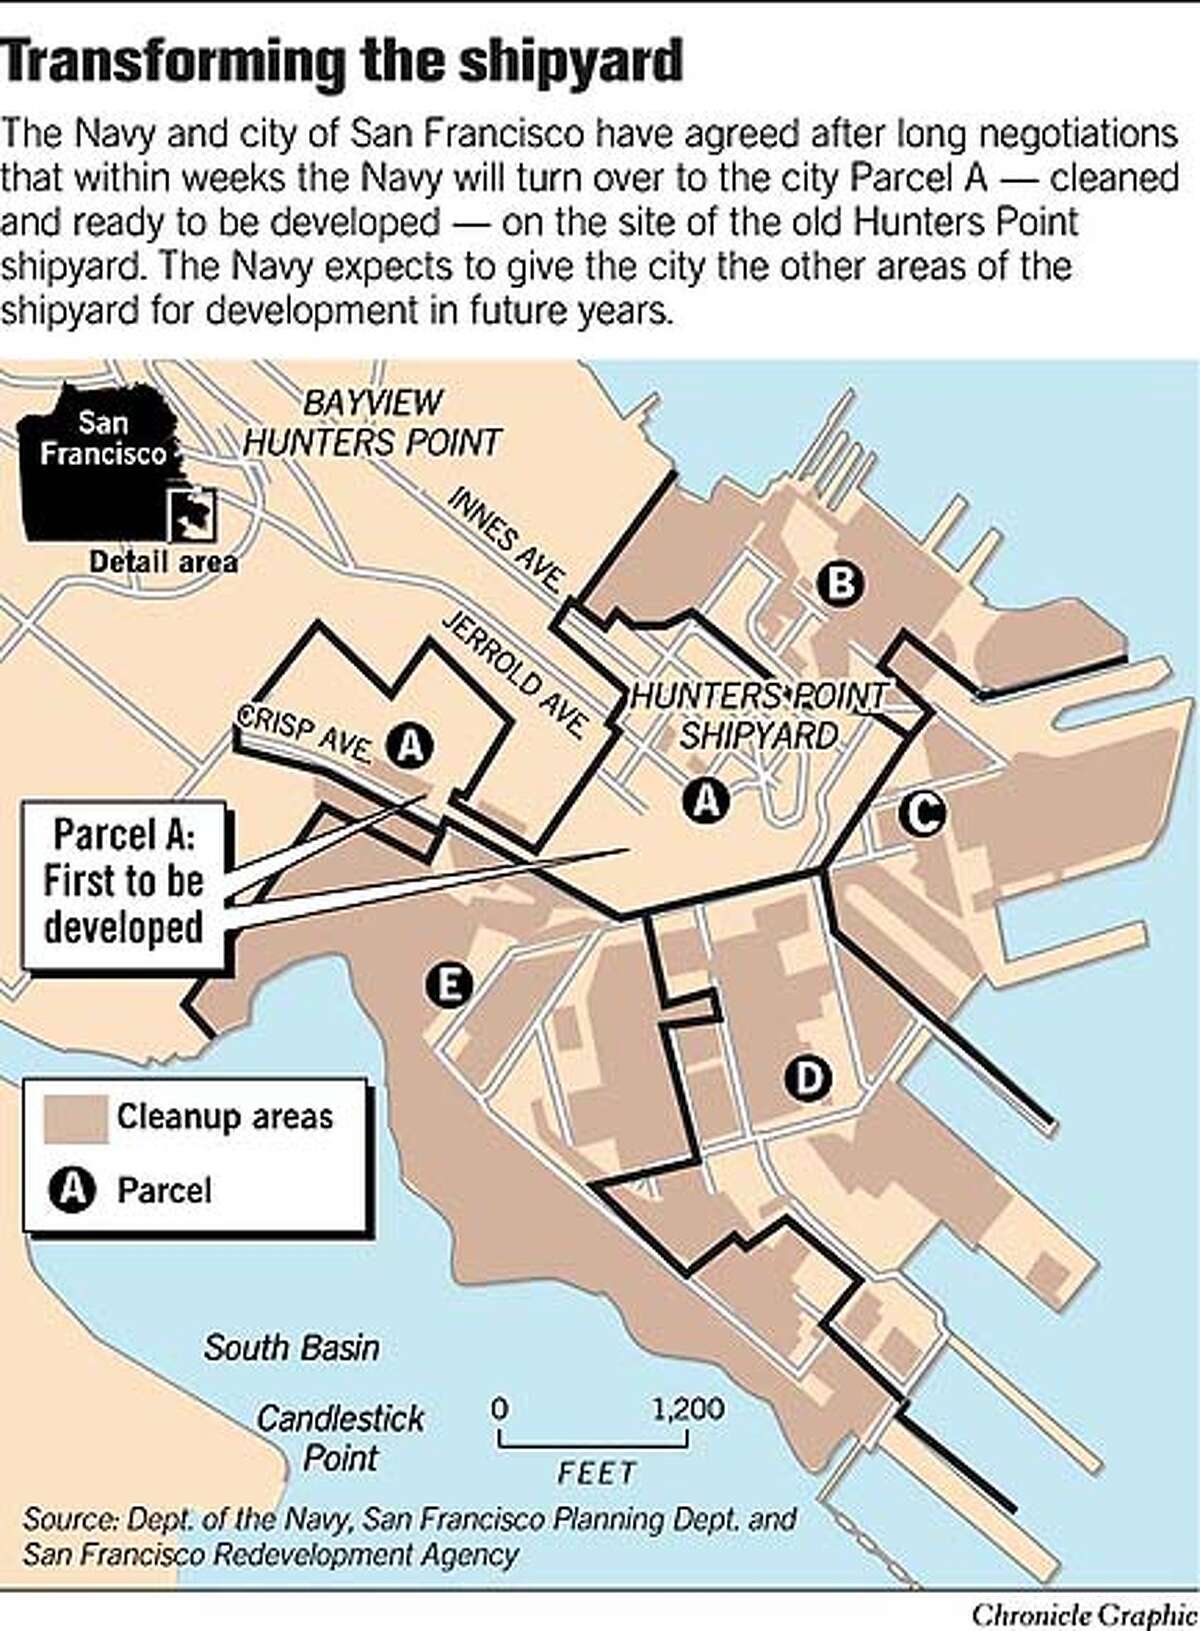 Transforming the Shipyard. Chronicle Graphic